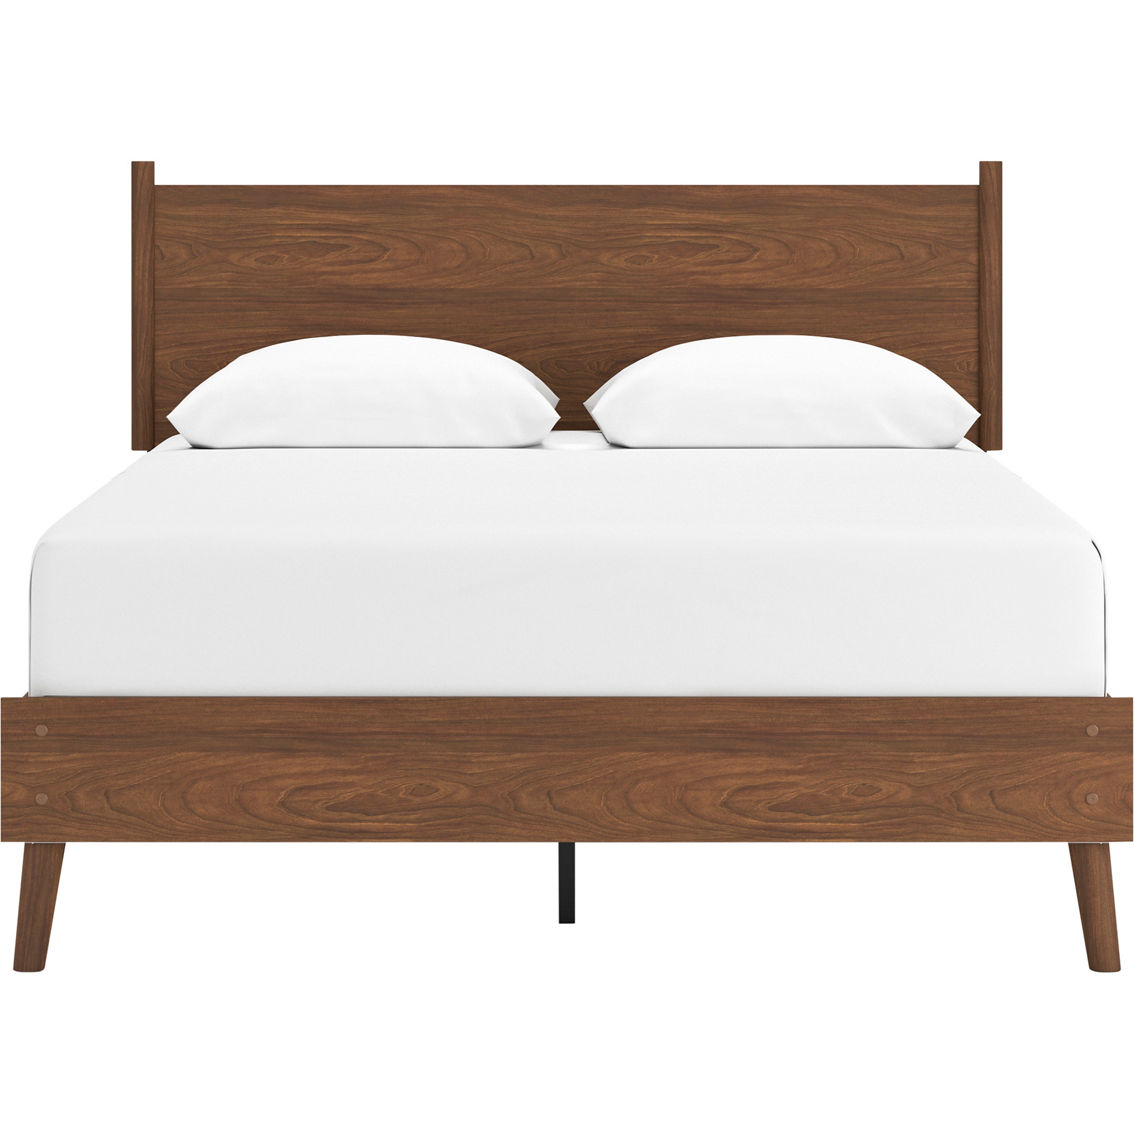 Signature Design by Ashley Fordmont Ready-to-Assemble Platform Bed with Headboard - Image 6 of 7